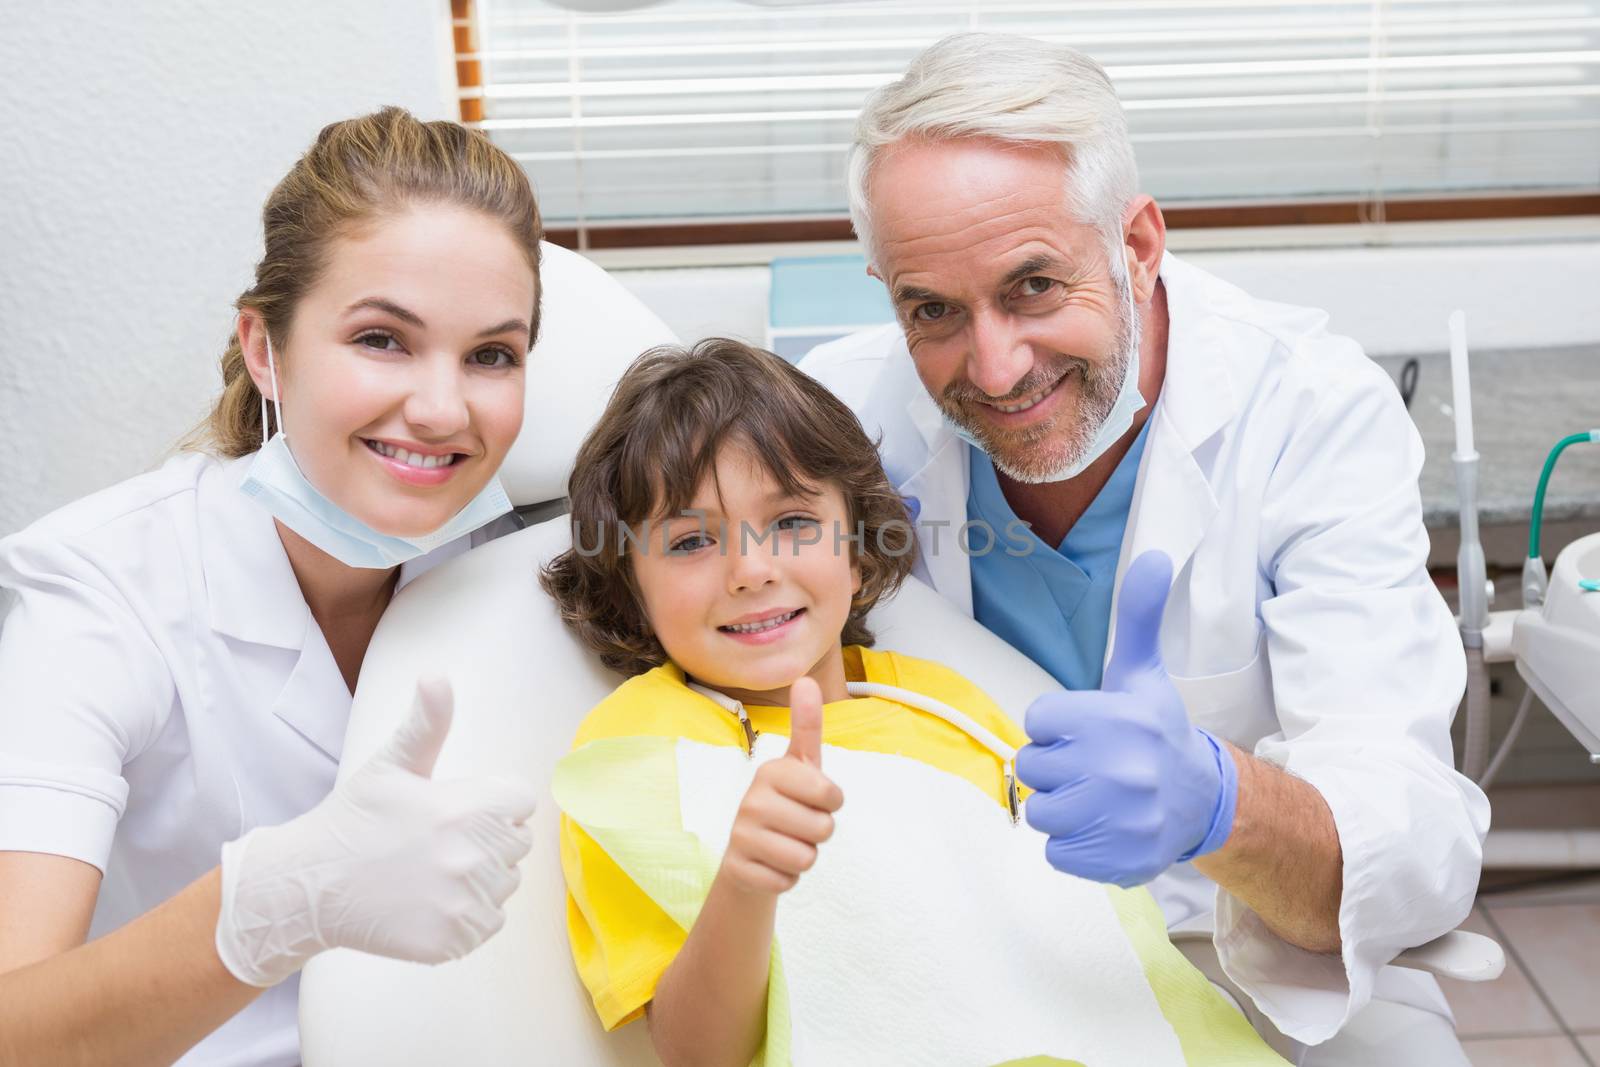 Pediatric dentist assistant and little boy all smiling at camera with thumbs up by Wavebreakmedia